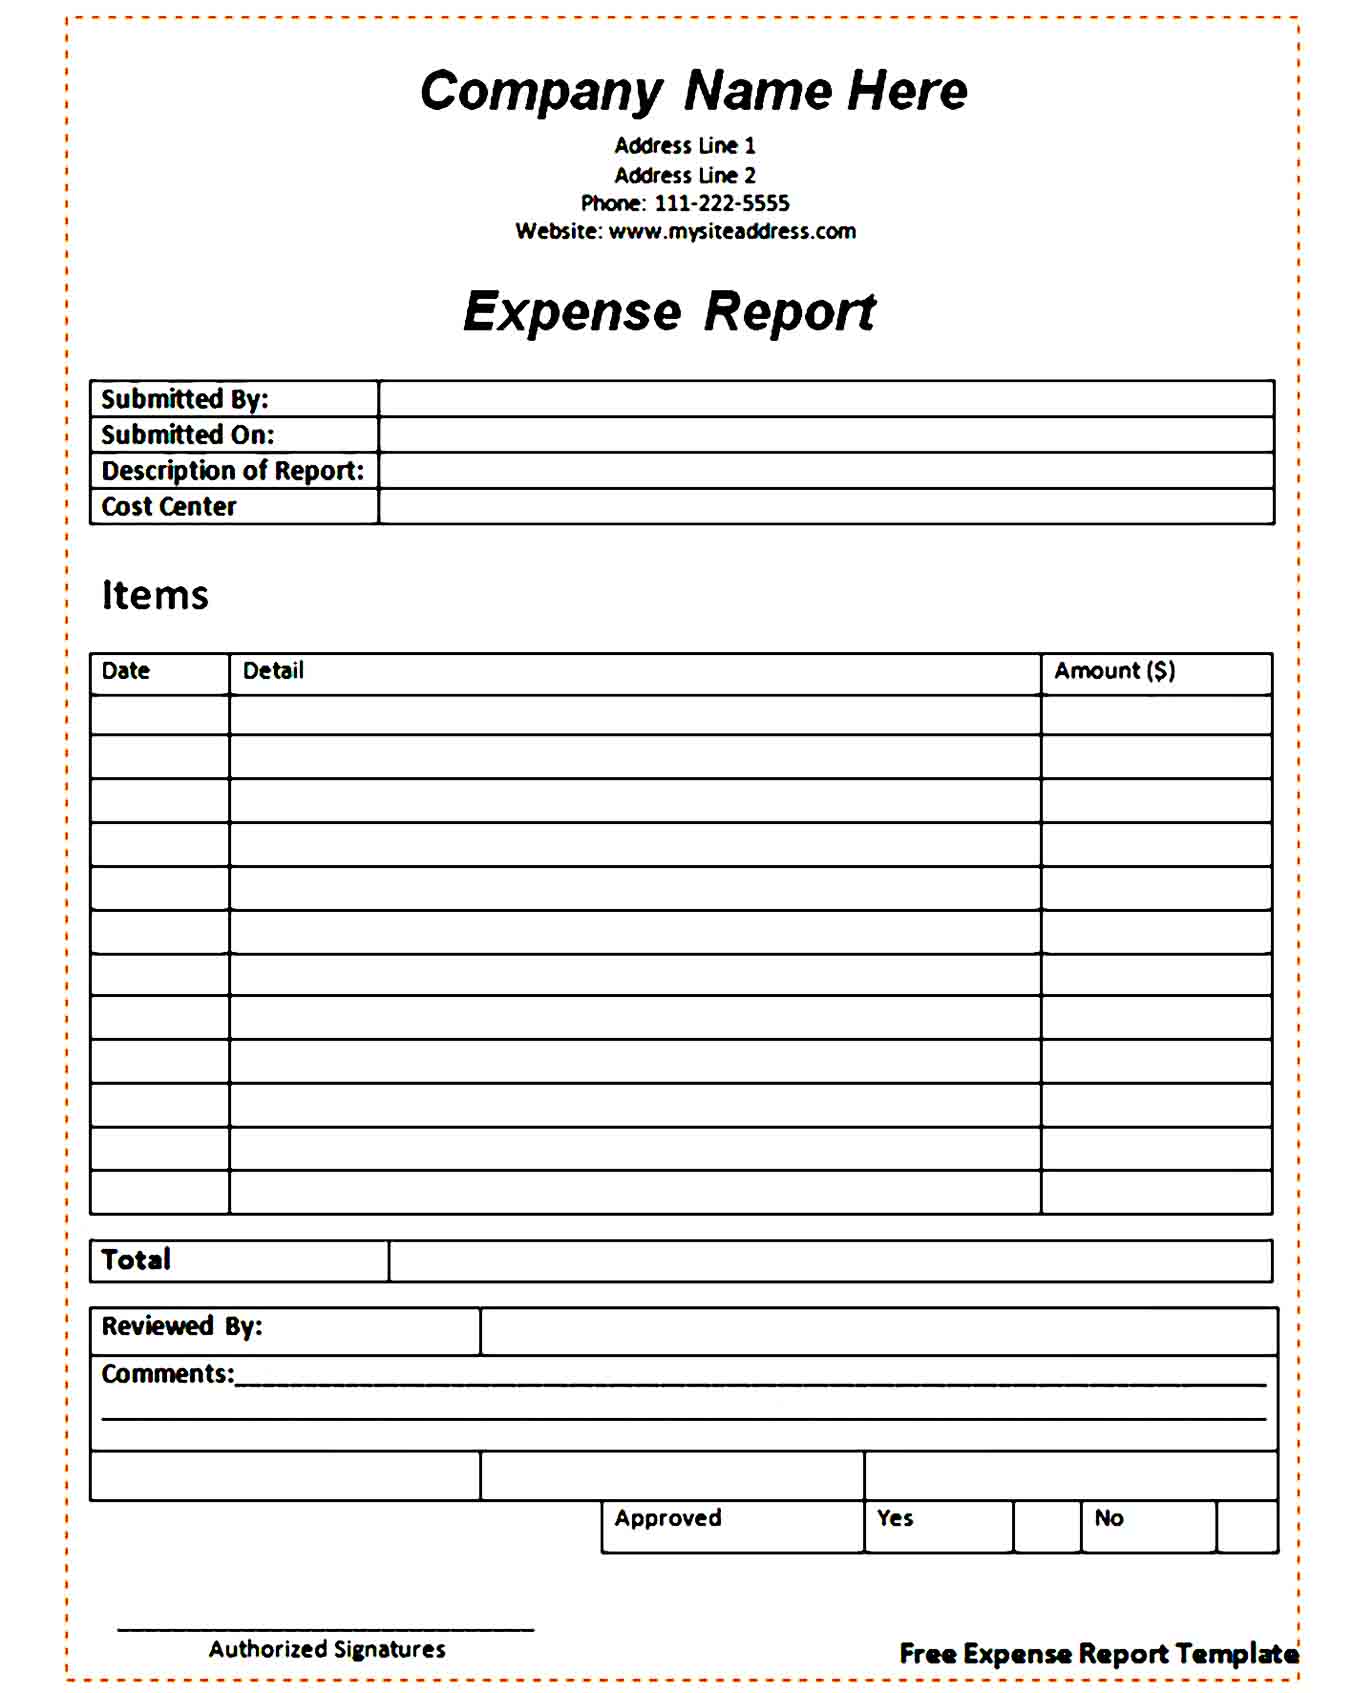 expense report template 30